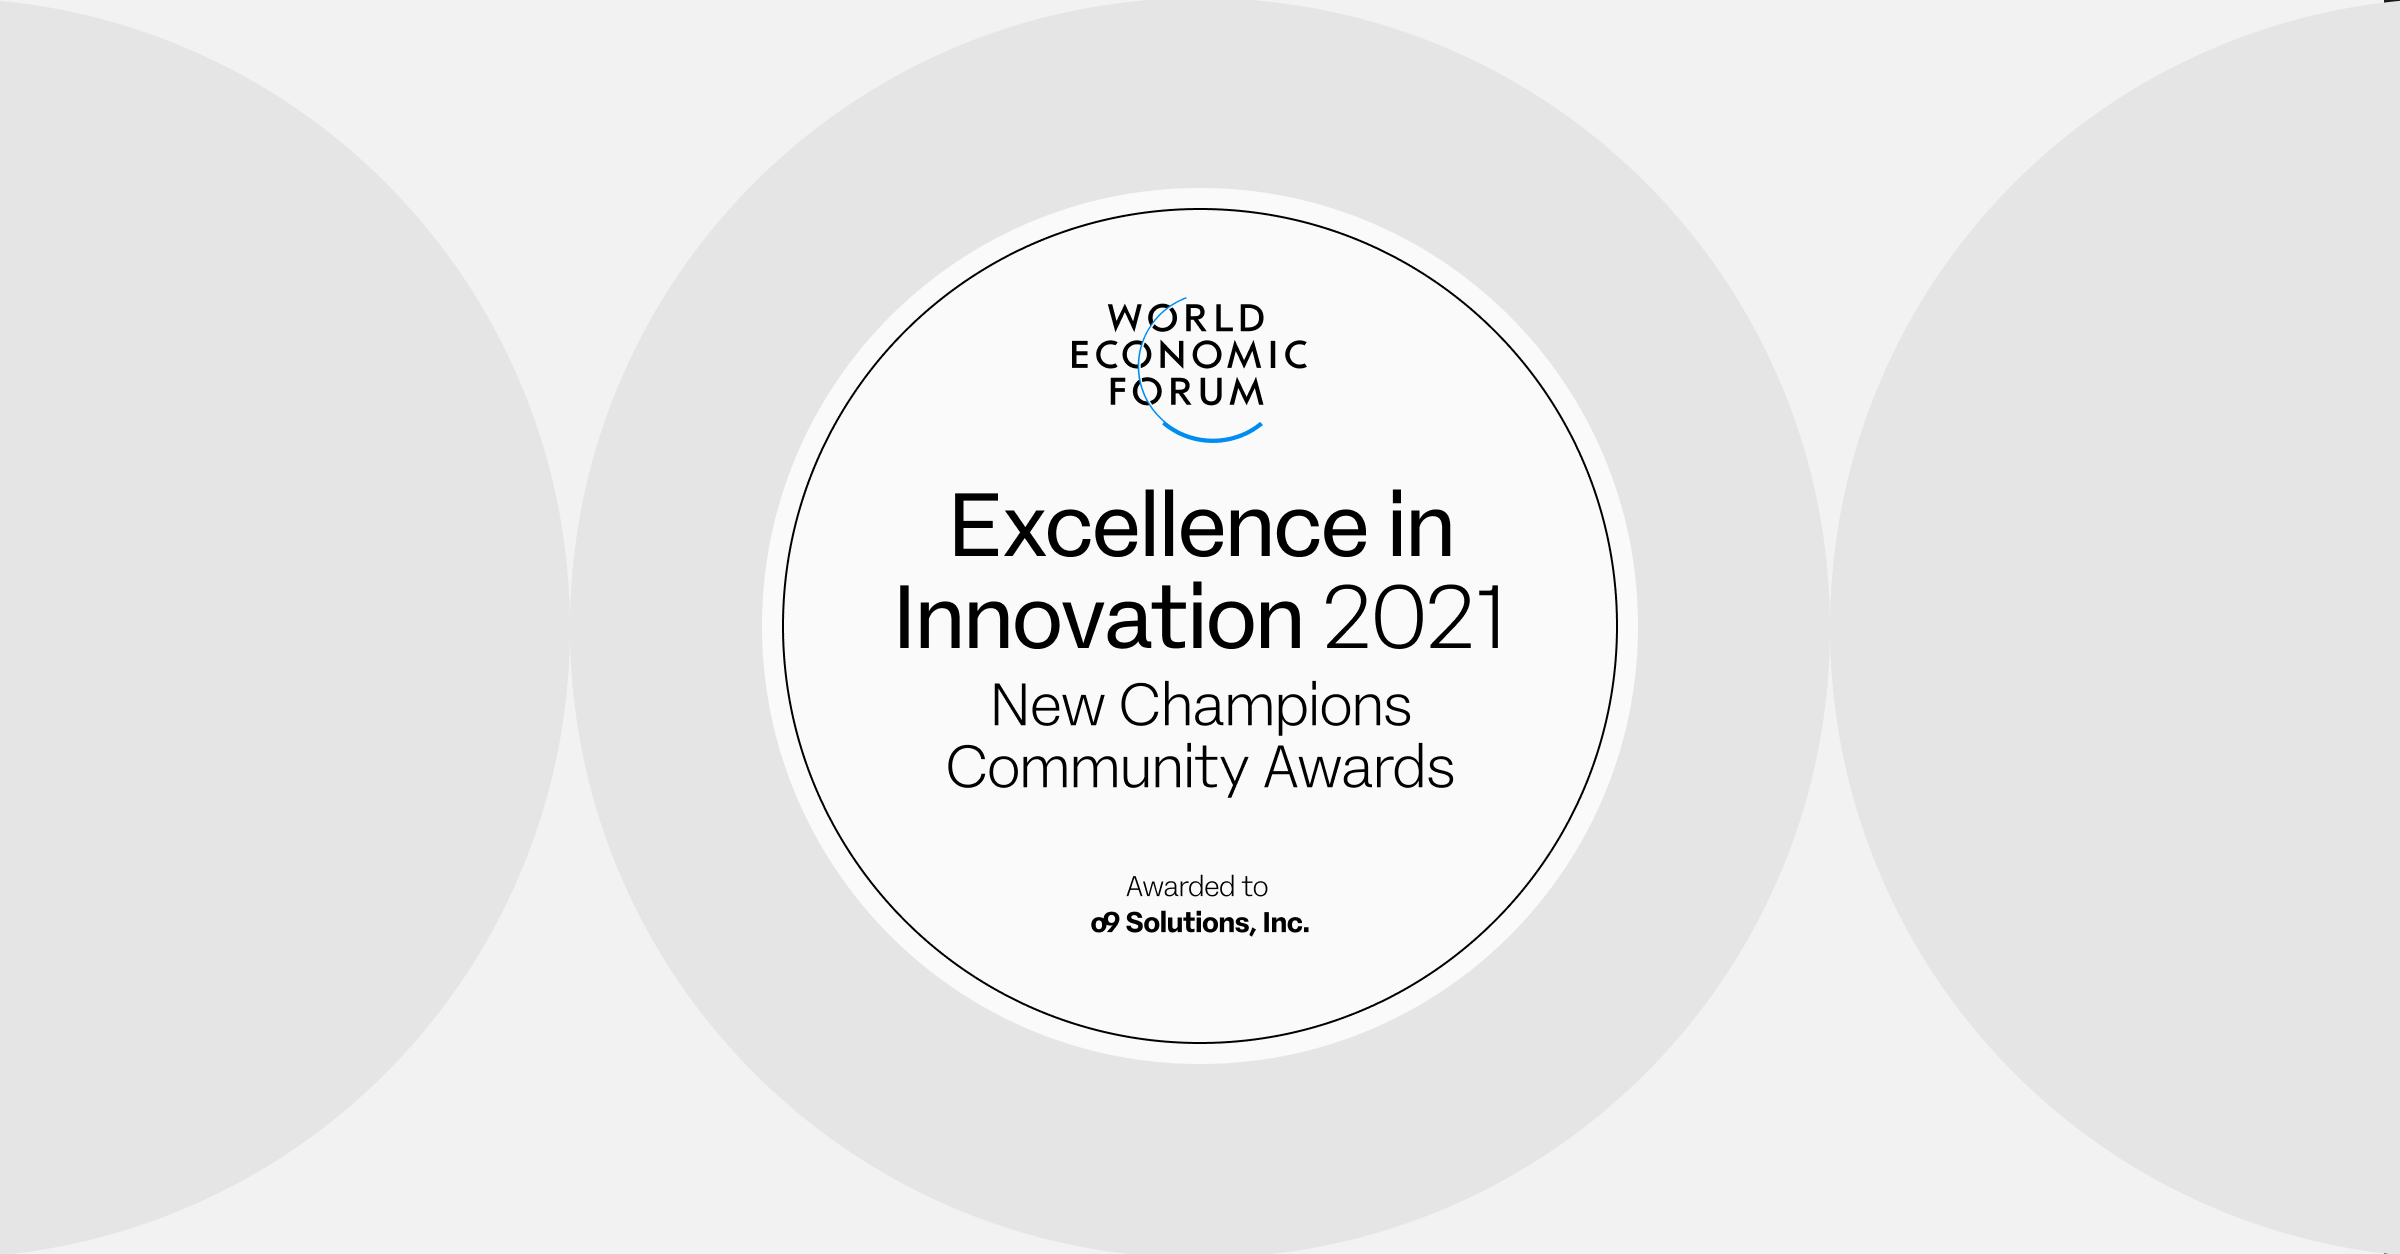 o9 Solutions Recognized by the World Economic Forum With the 2021 New Champions Awards for Excellence in Innovation